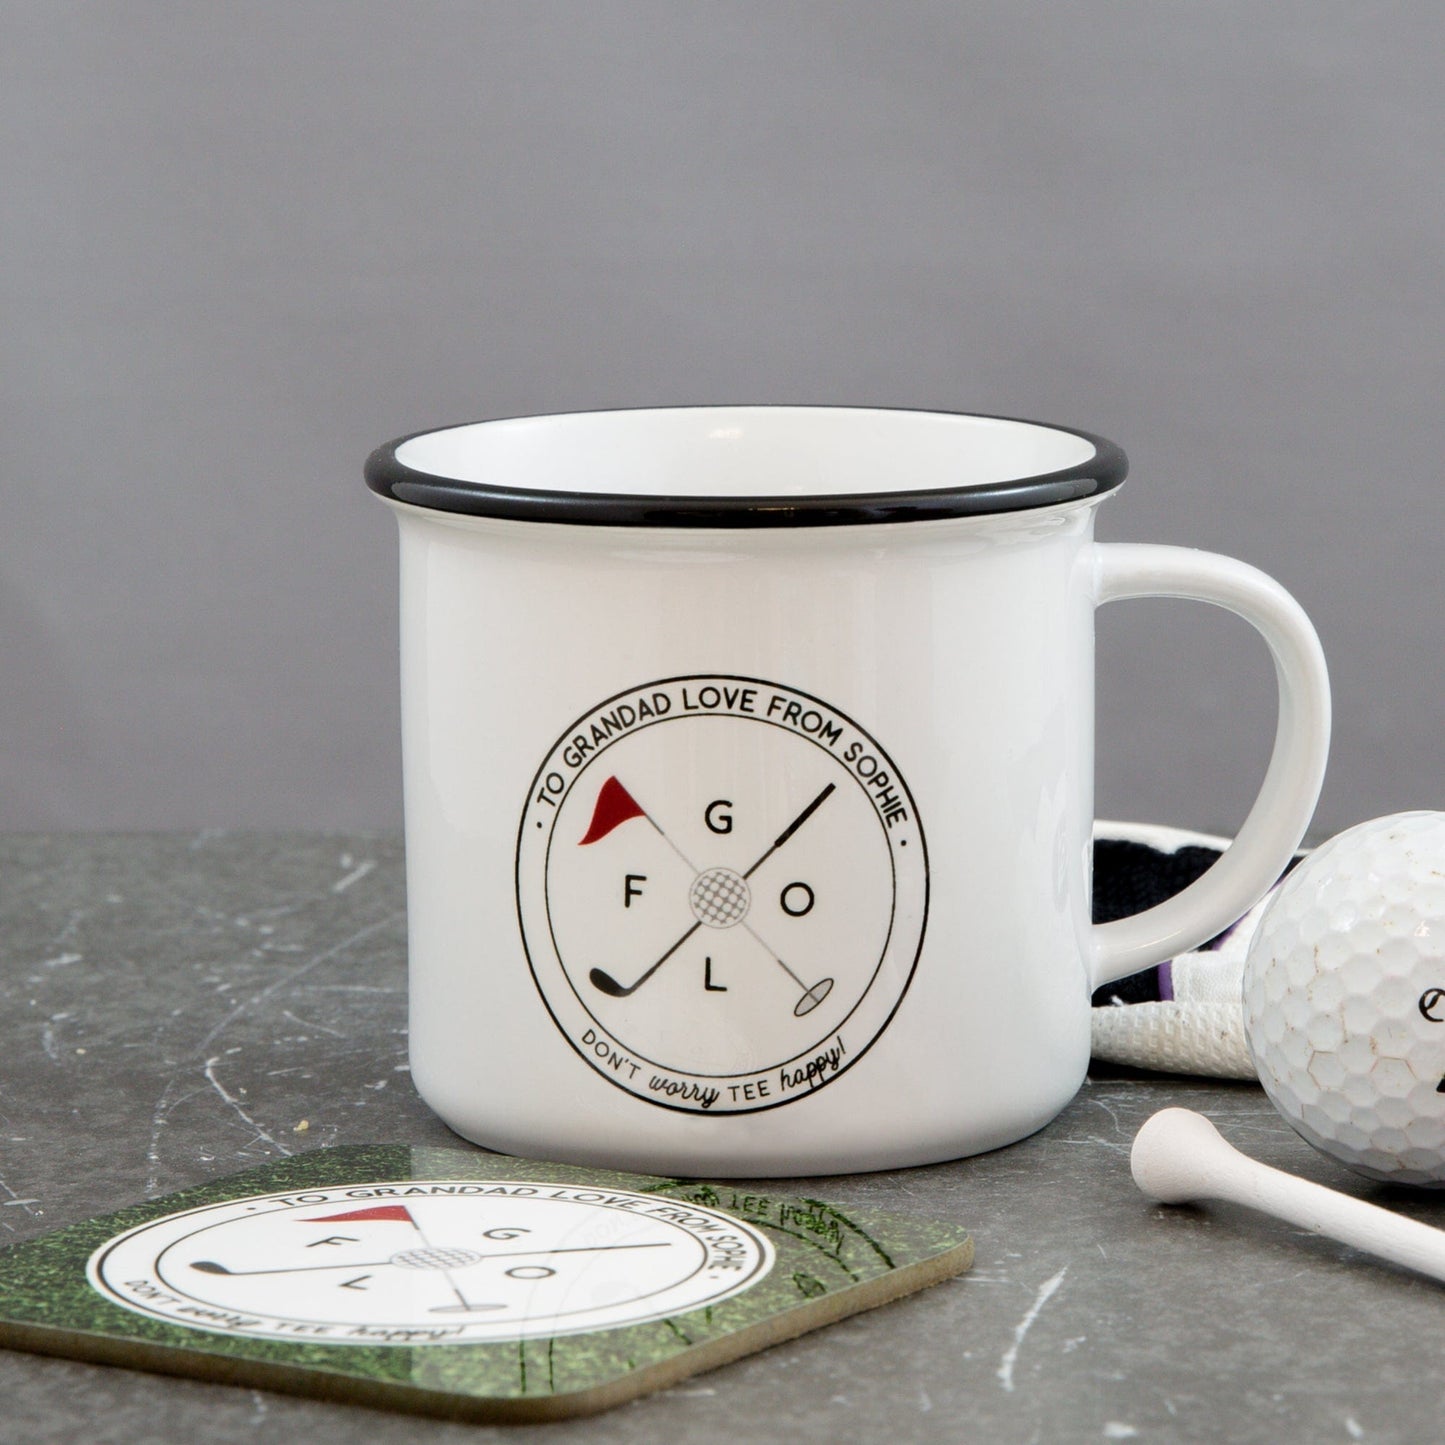 Golf Lover Gift - Don't Worry Tee Happy' Golfing Pun Mug - Ideal Gift For Him